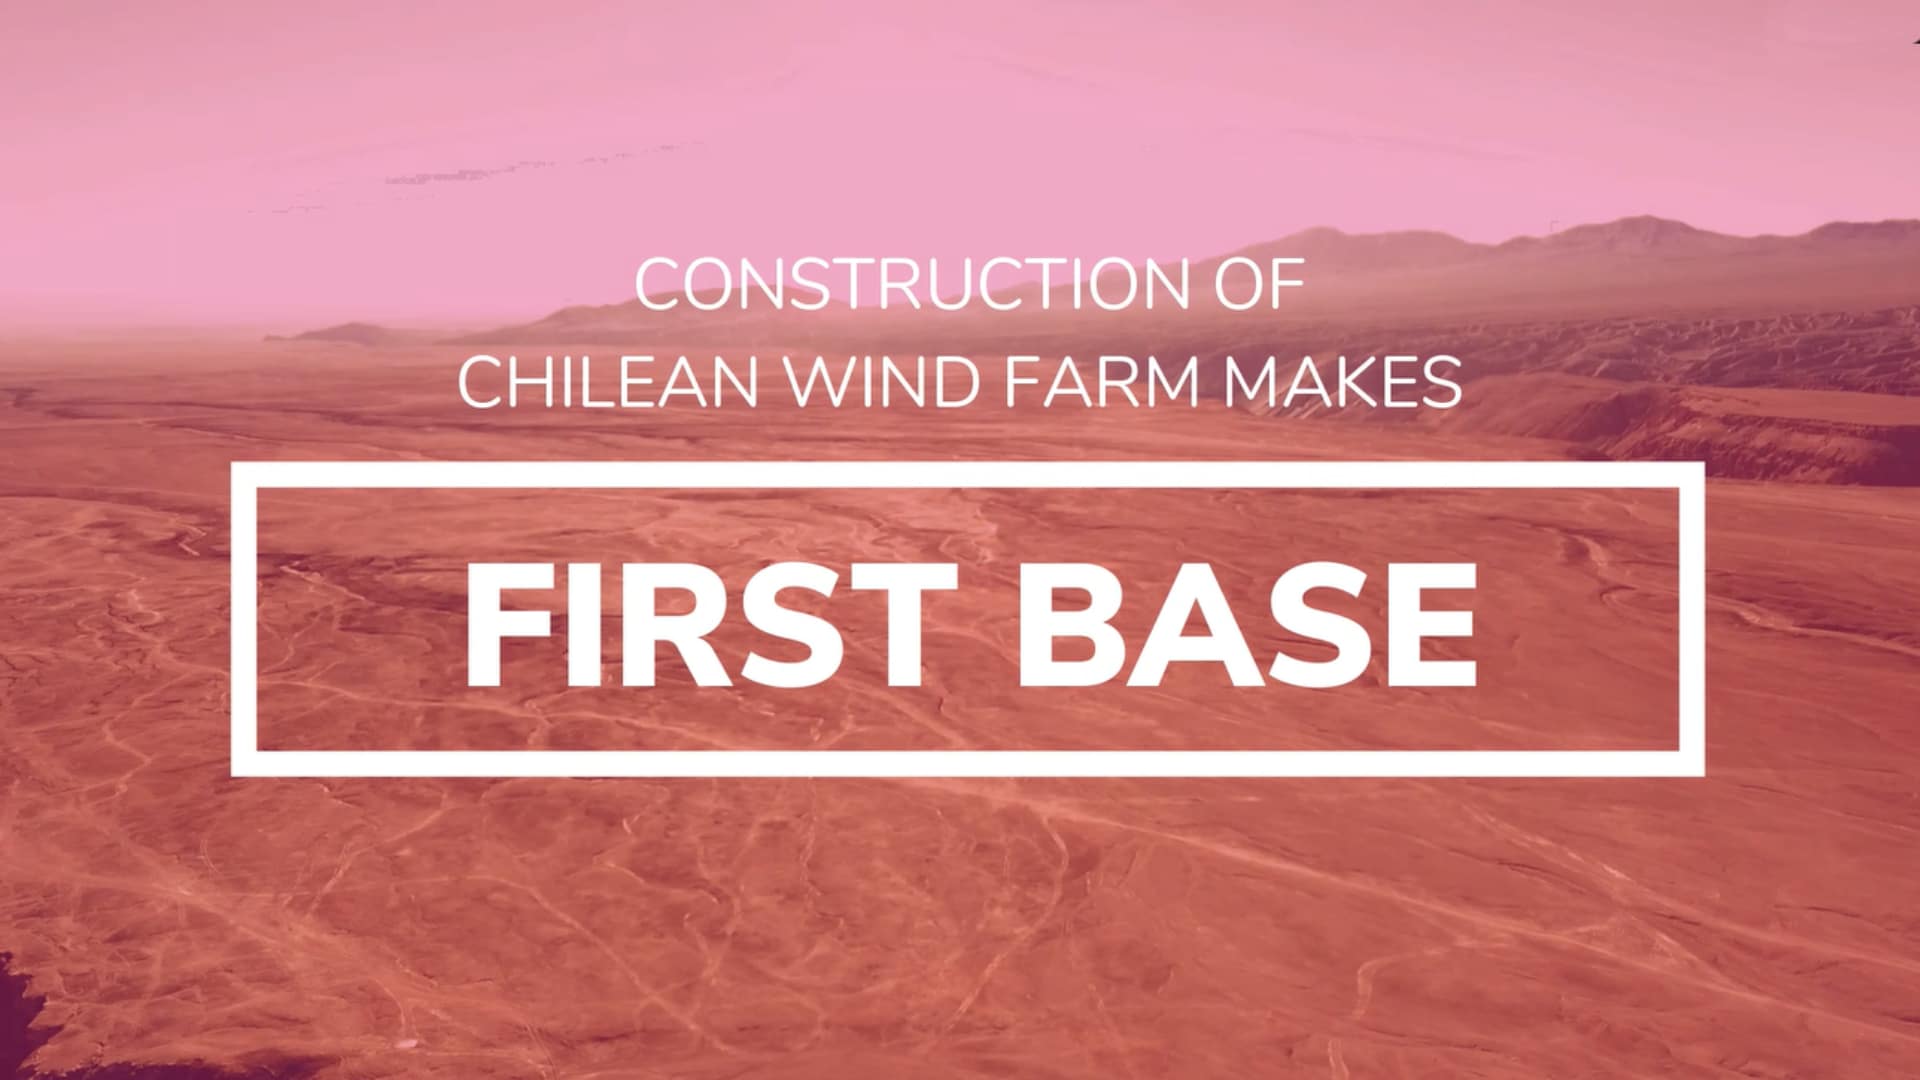 'Construction of Chilean wind farm makes first base' Video thumbnail